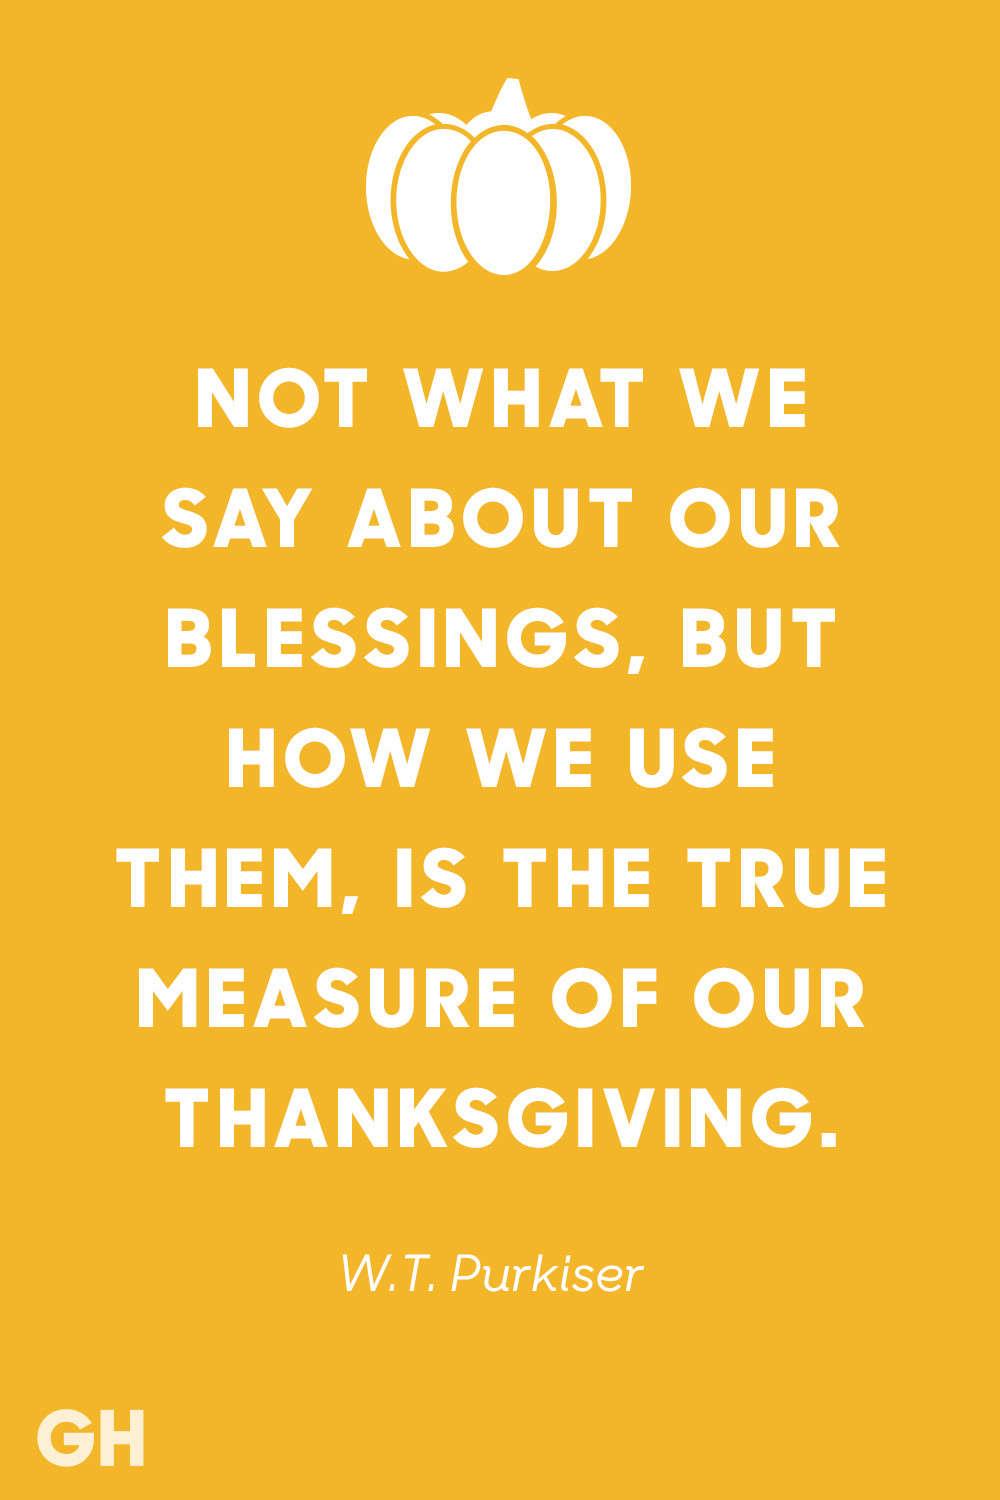 Quote For Thanksgiving
 15 Best Thanksgiving Quotes Inspirational and Funny